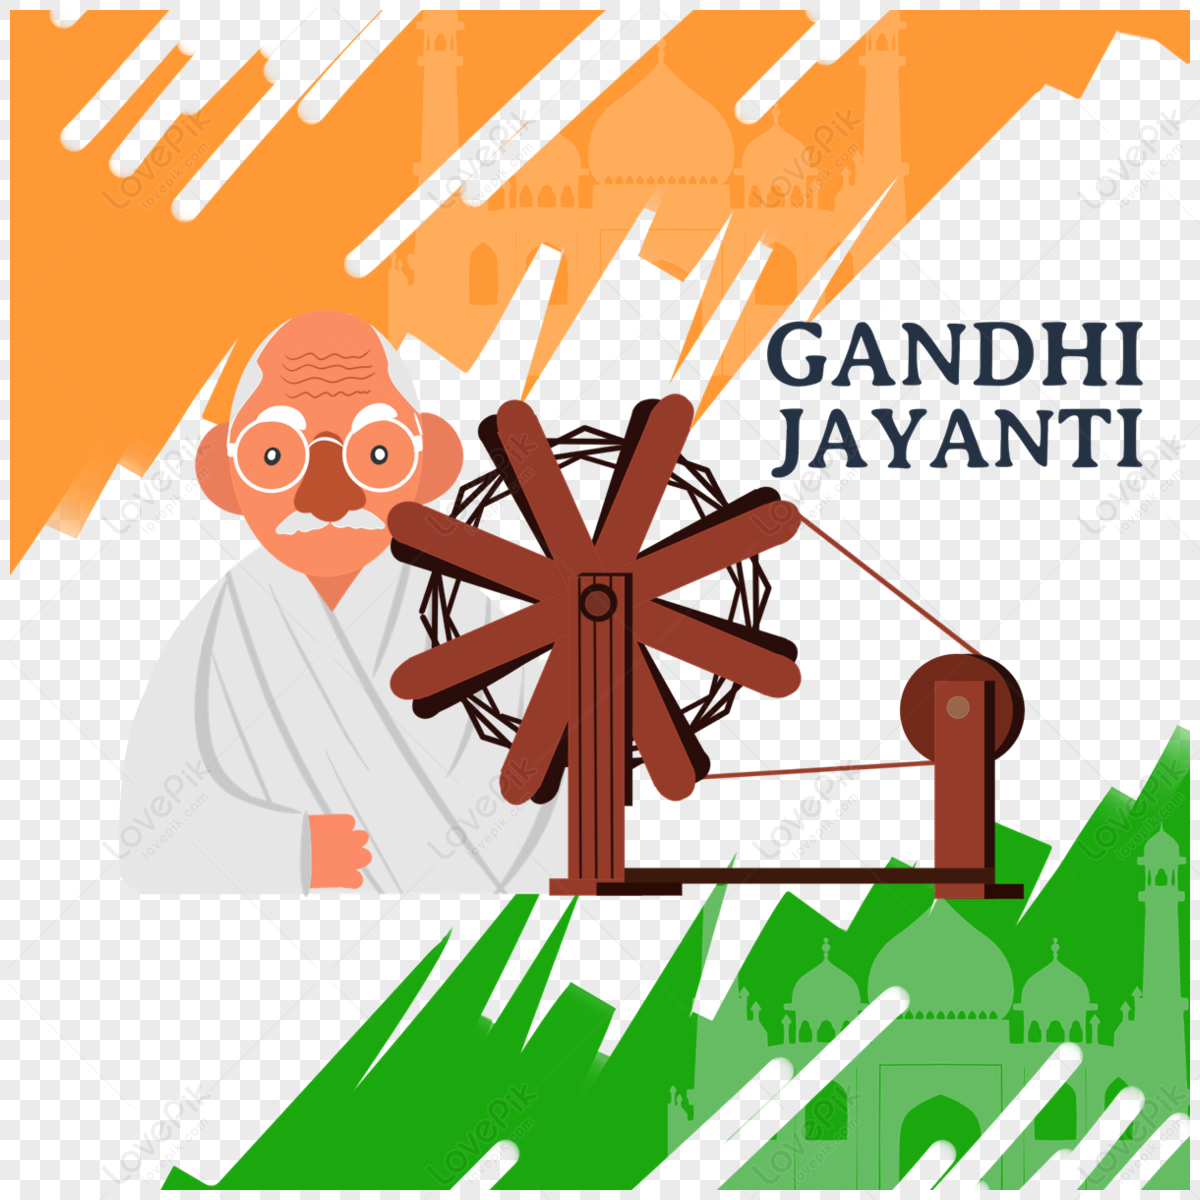 Gandhi Jayanti Cartoon Gandhi And Textiles Abstract Illustration, Abstract  Free PNG Image, Birthday Hd Transparent PNG, Cartoon PNG Transparent  Background PNG Picture And Clipart Image For Free Download - Lovepik |  375513165